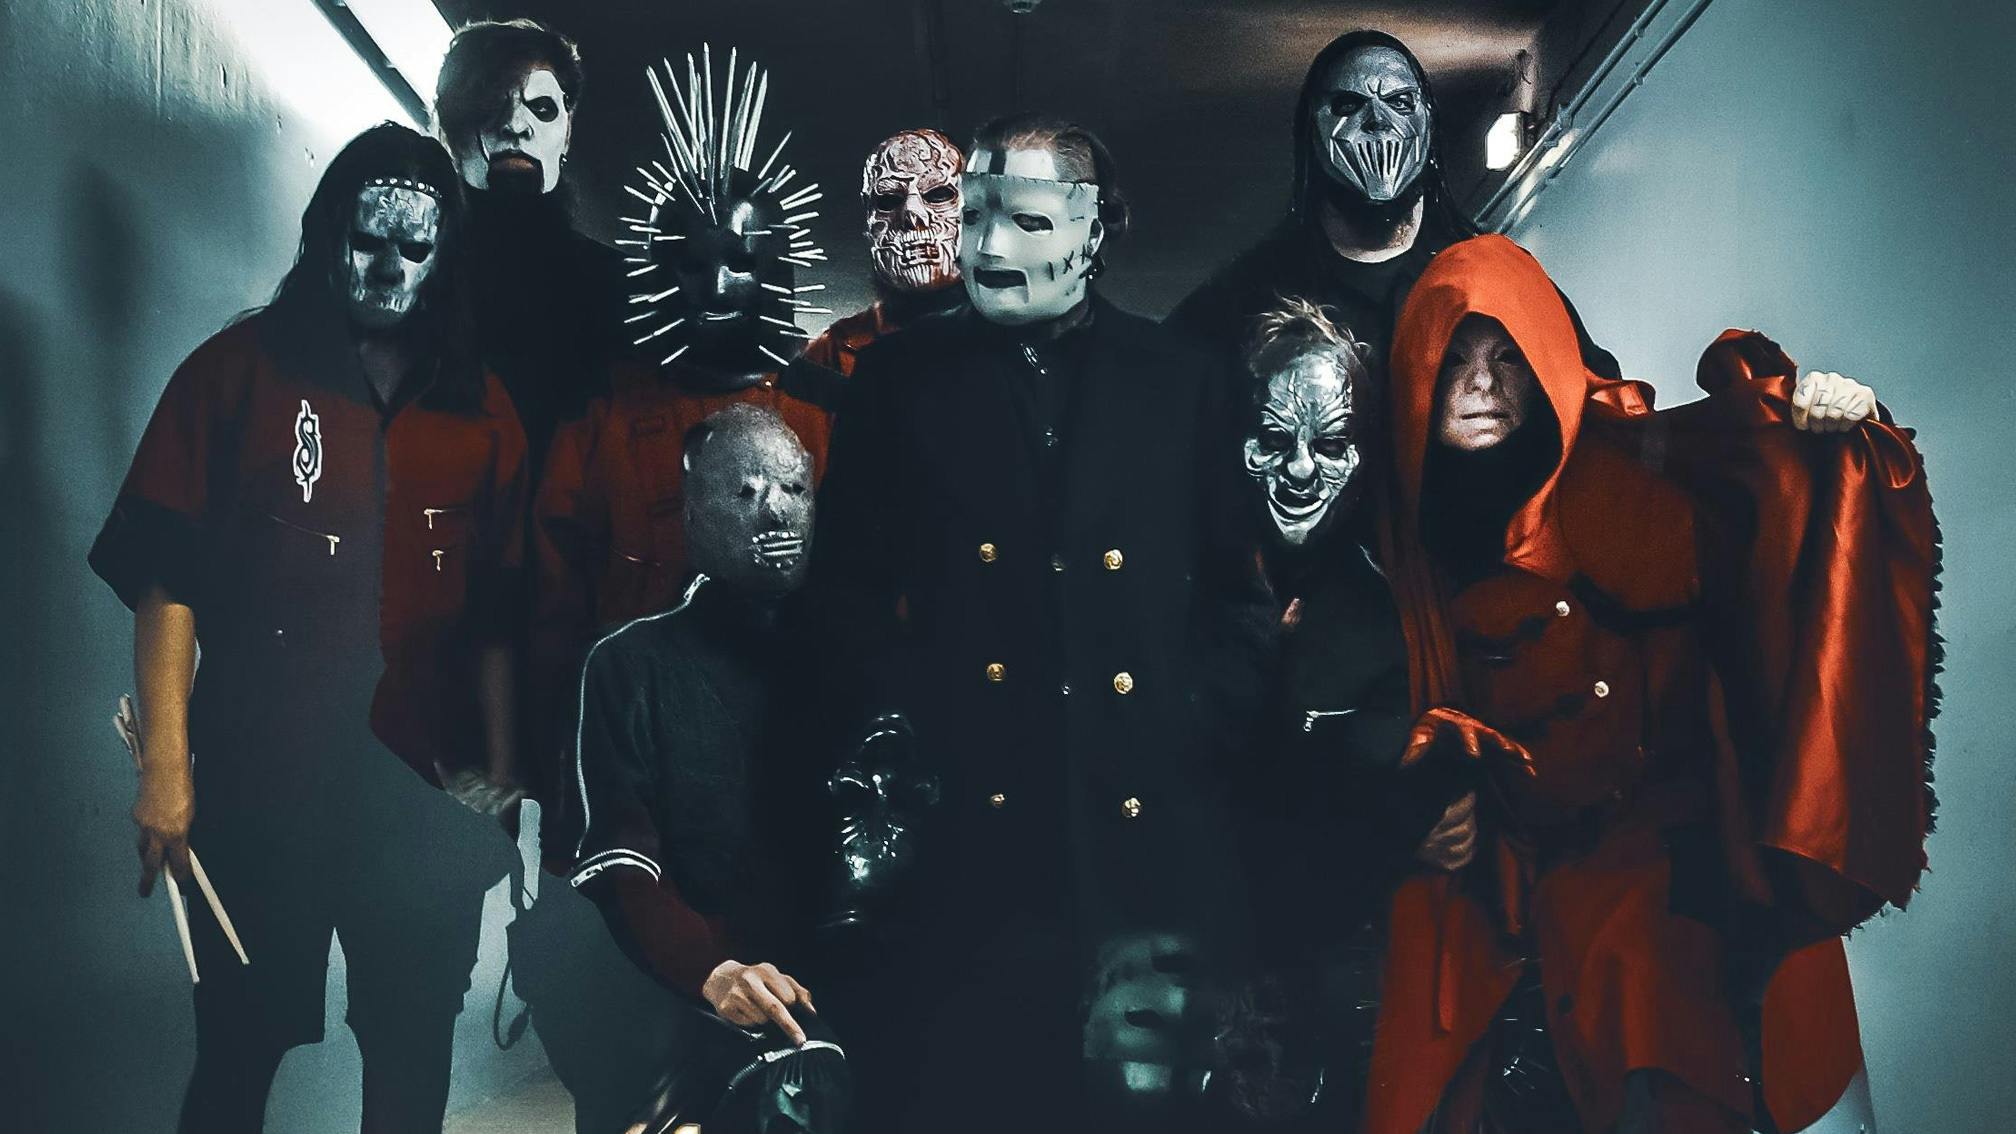 Clown: "I got very creative" on potential new Slipknot material during the pandemic